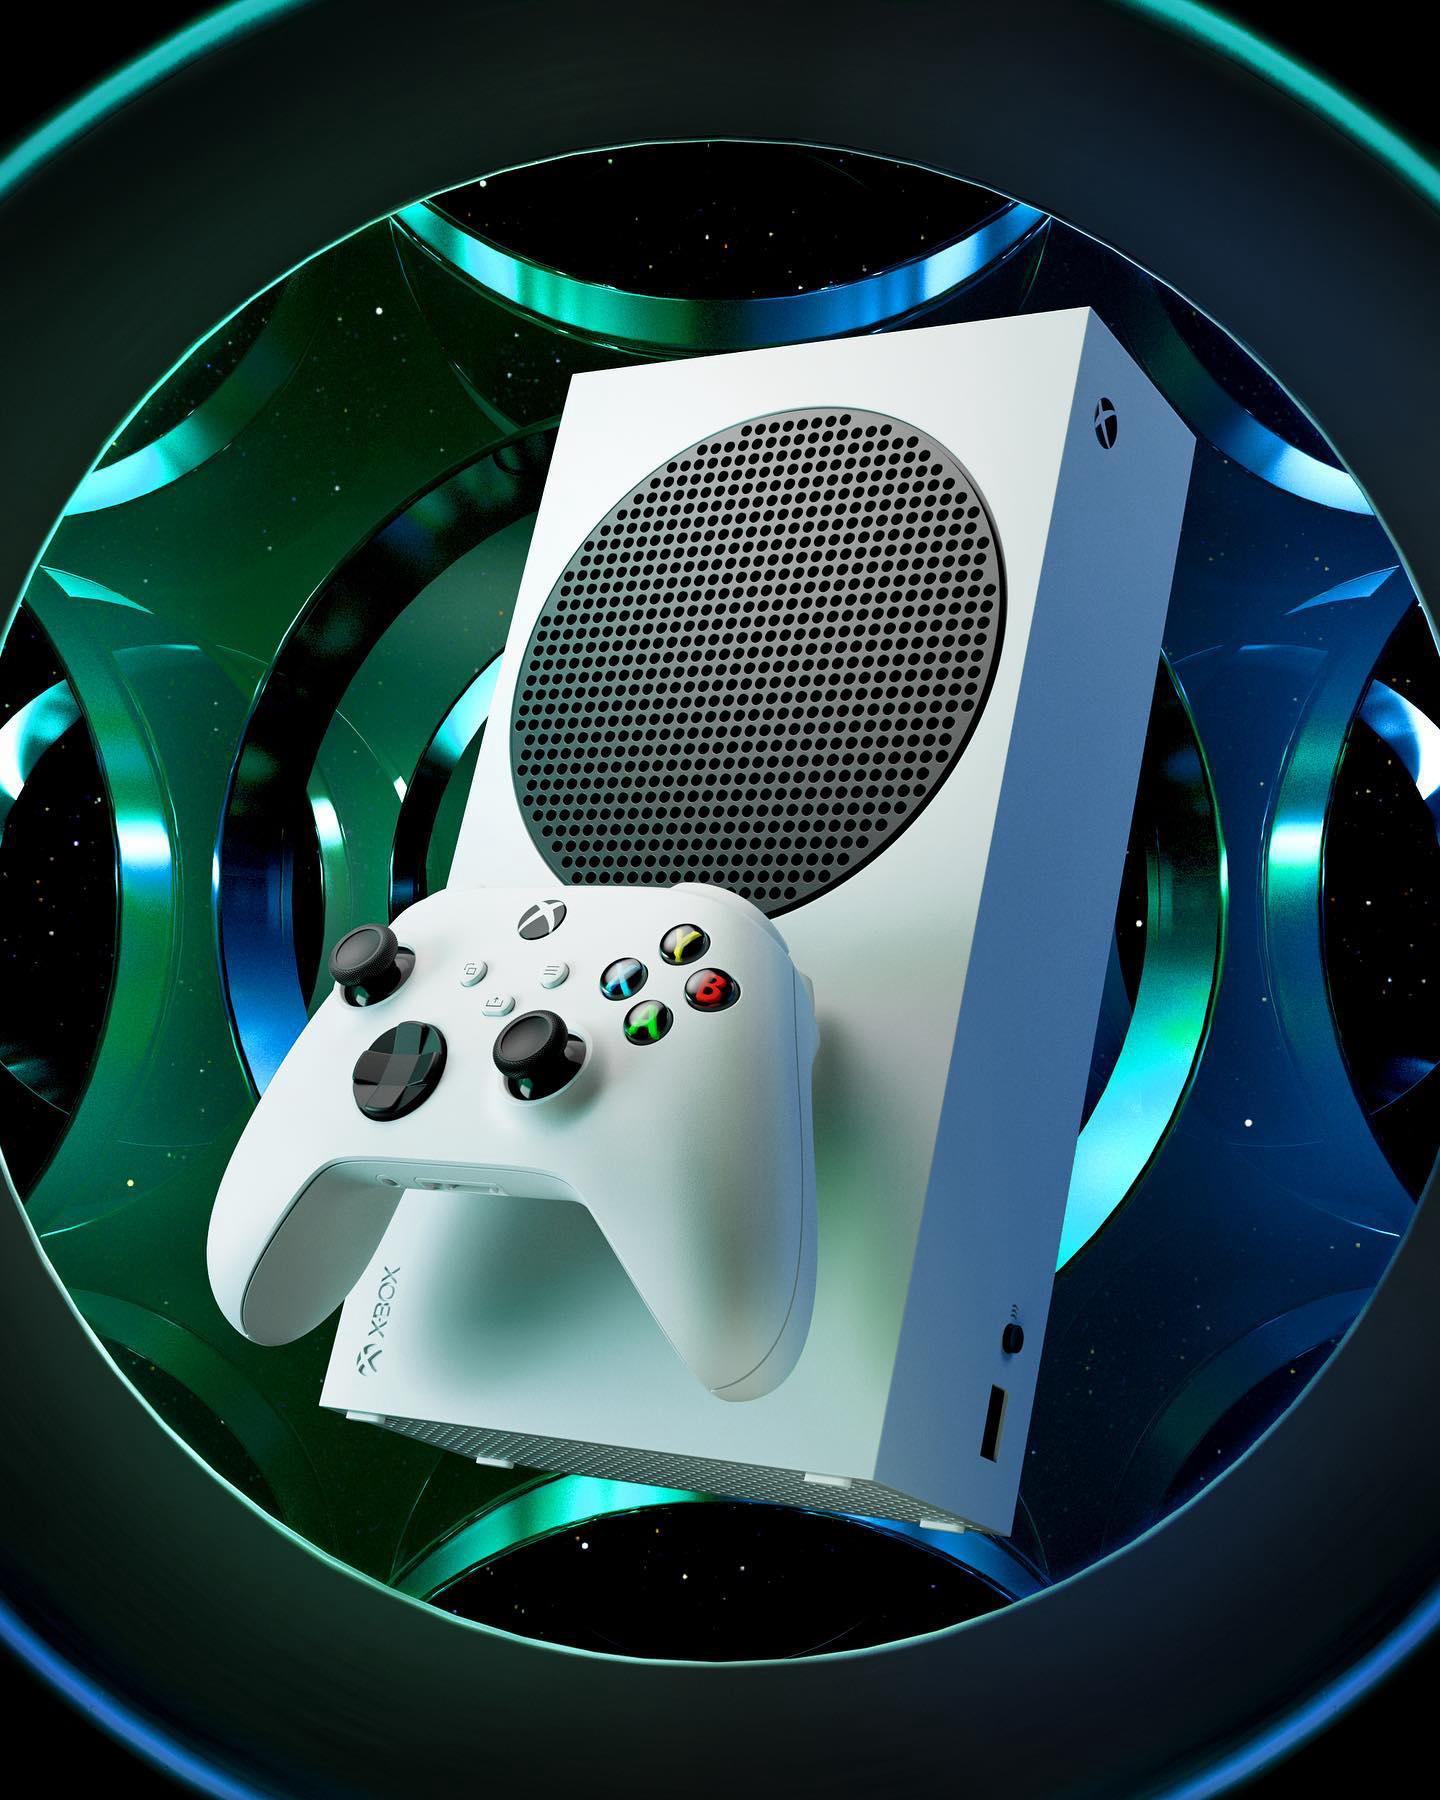 Xbox - Next gen SHOULD look like it comes from the future, actually